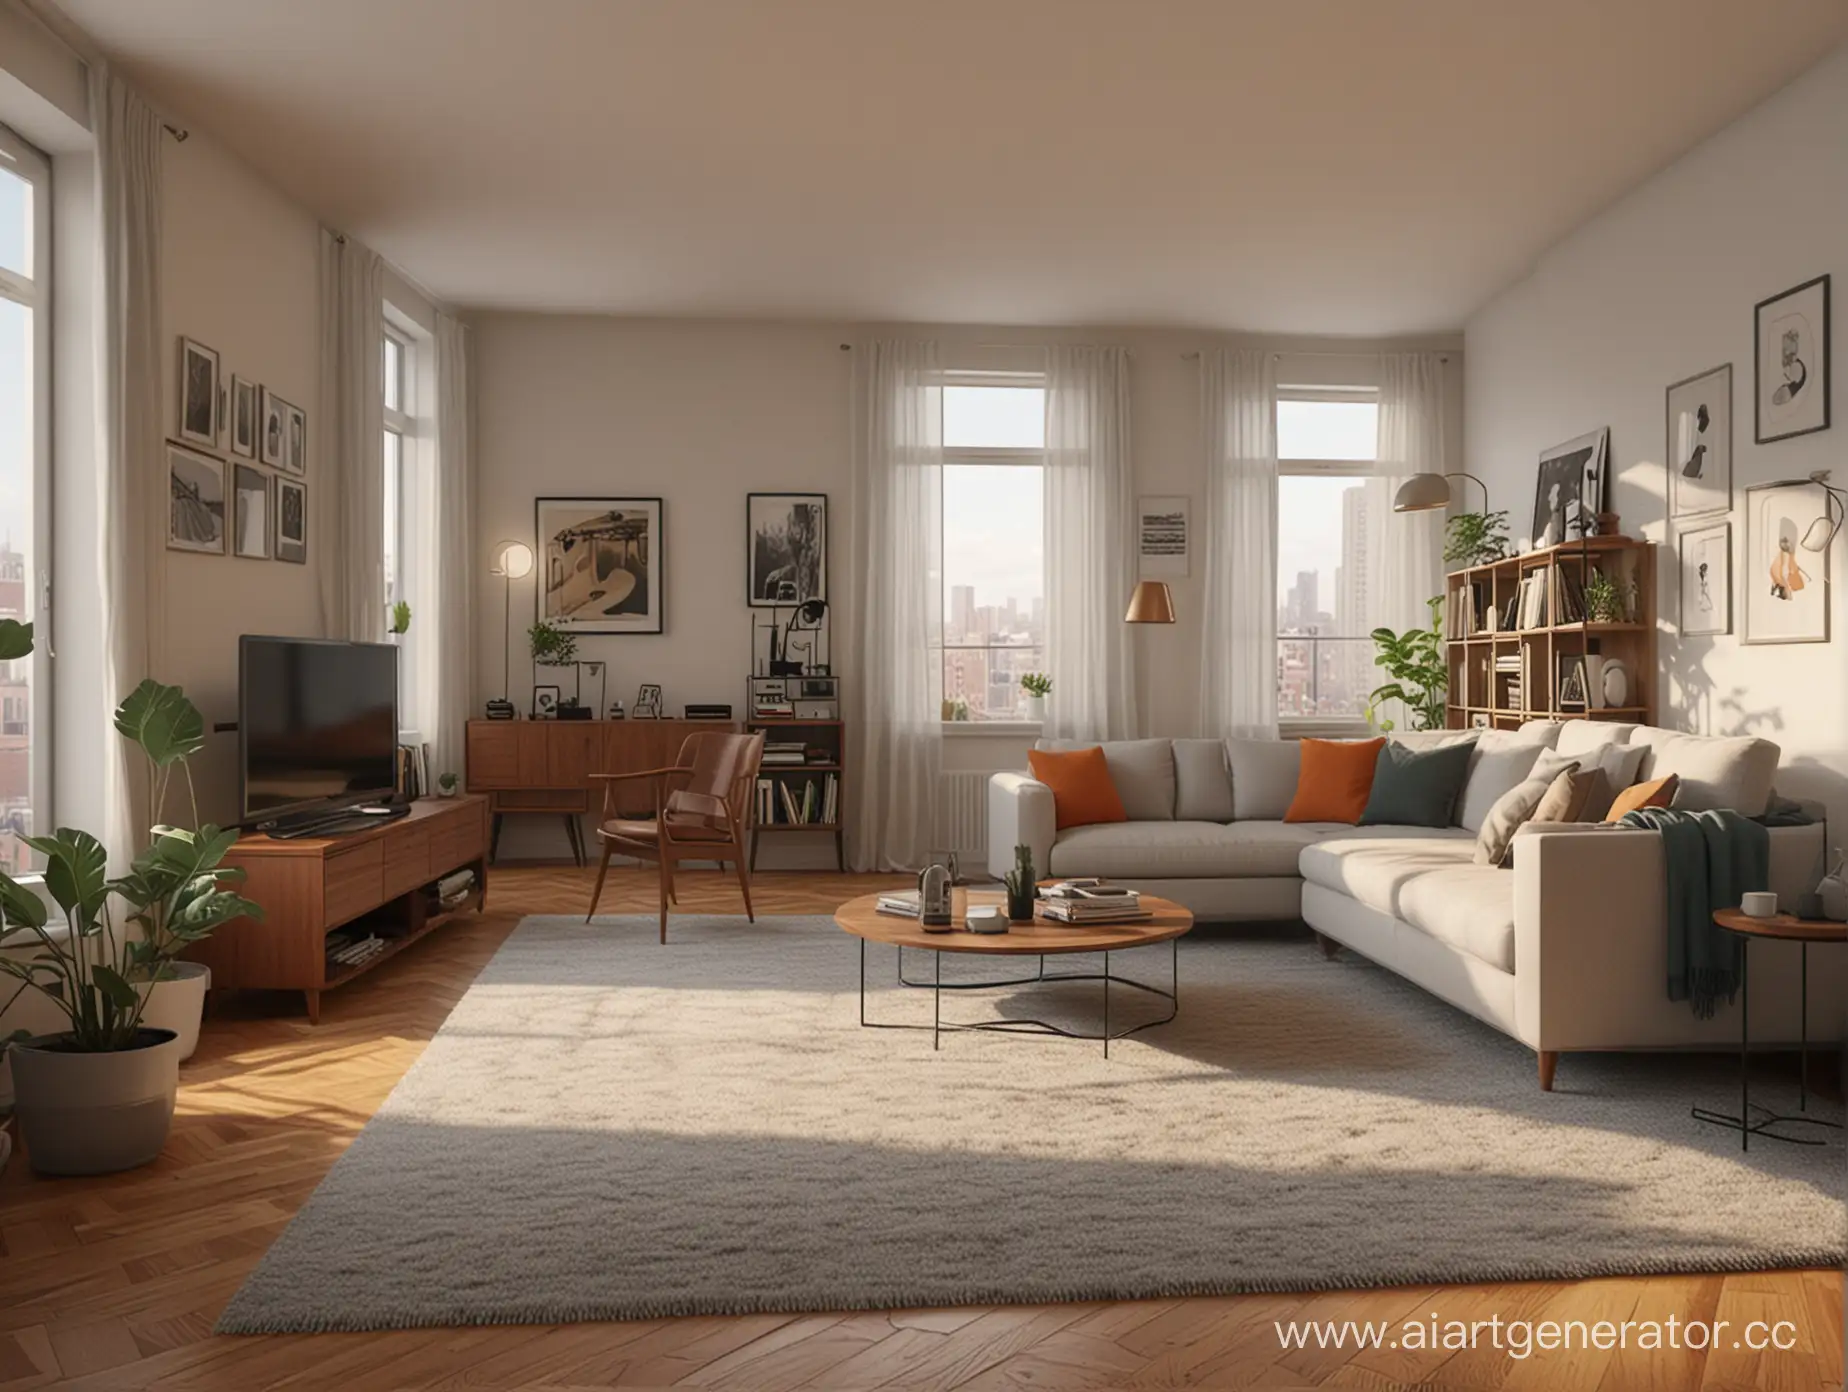 The apartment is Realistic 4k